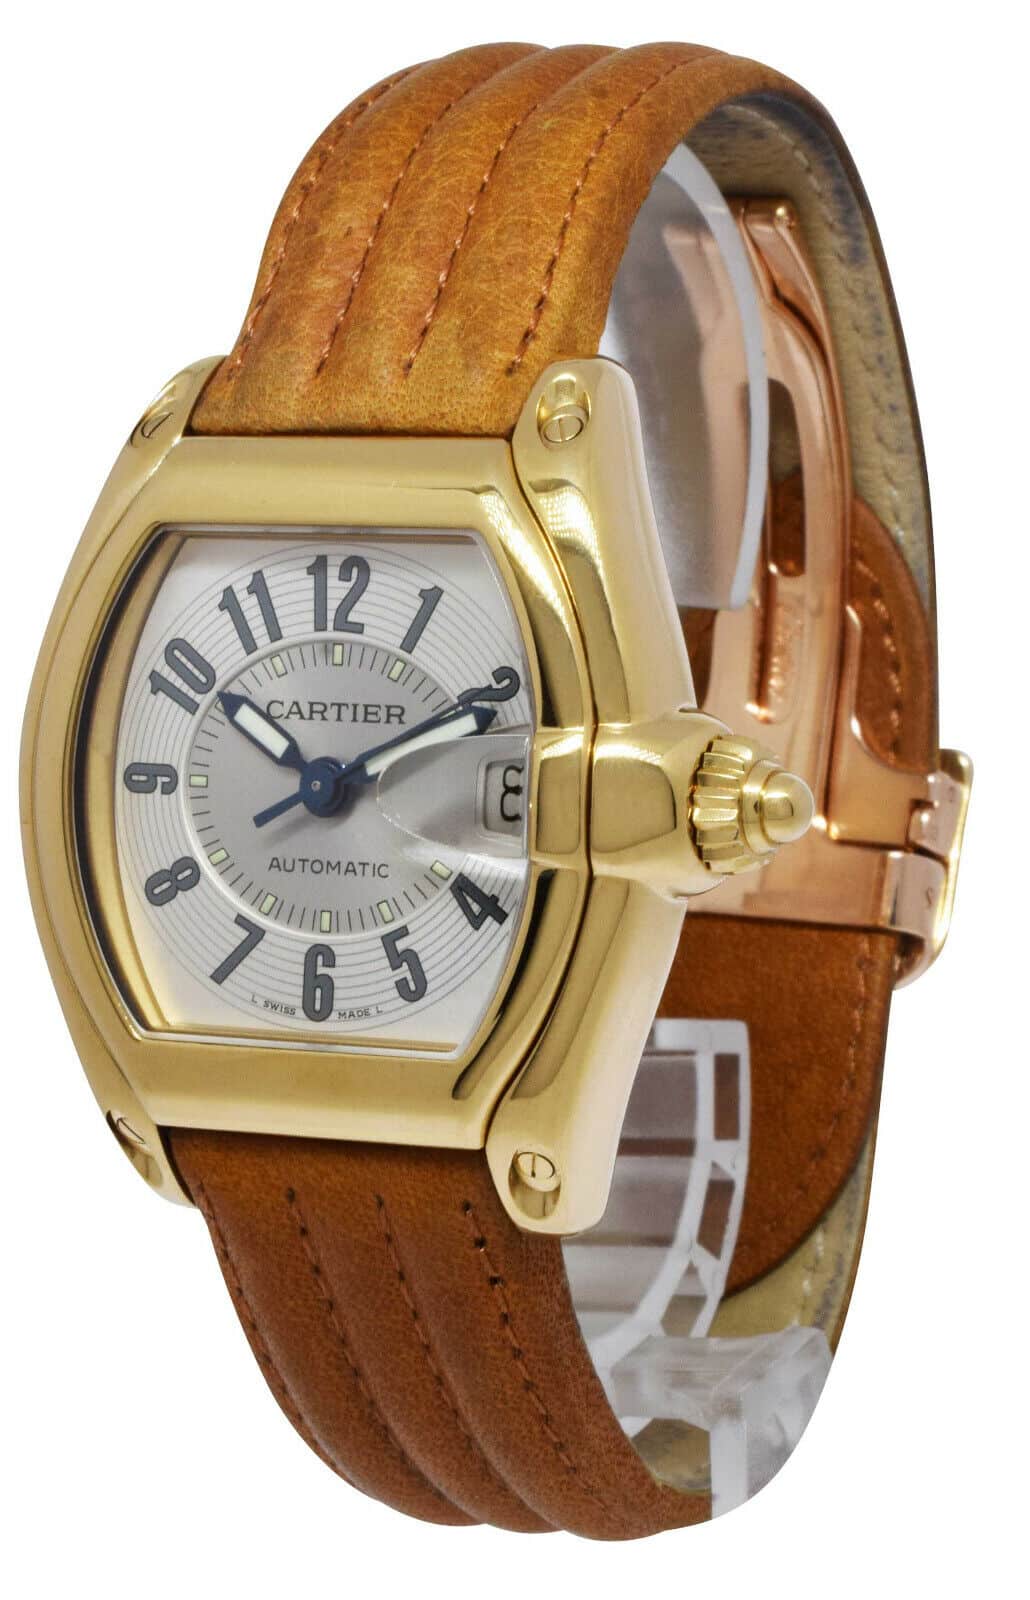 Cartier Roadster Date 18k Yellow Gold Silver Dial Mens Automatic Watch 2524